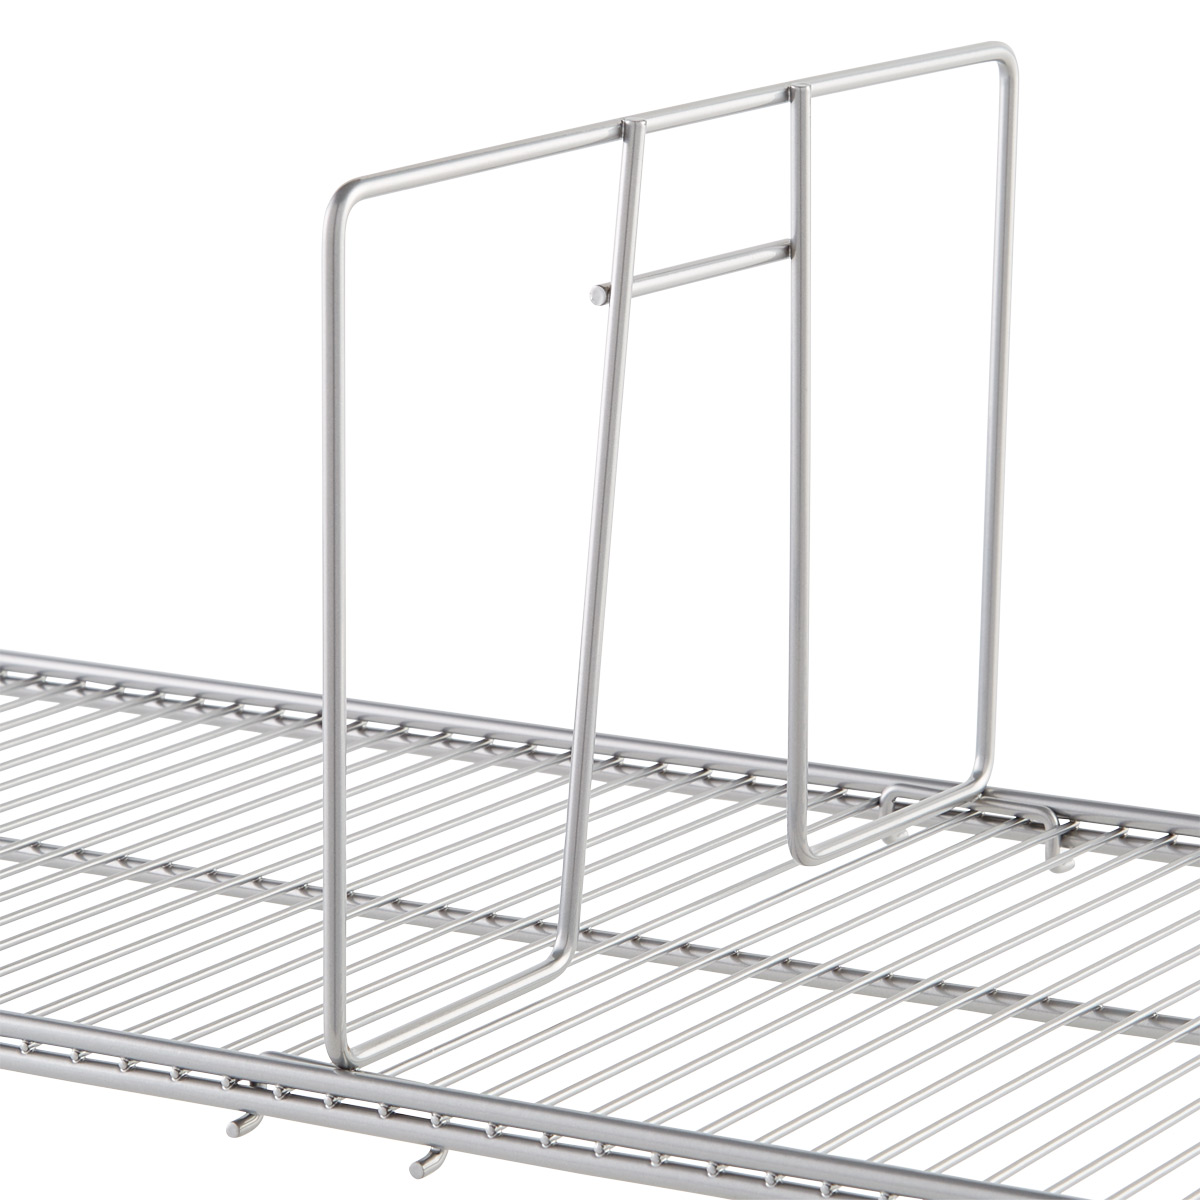 https://www.containerstore.com/catalogimages/495647/10013424-elfa-12in-Ventilated-Shelf-.jpg